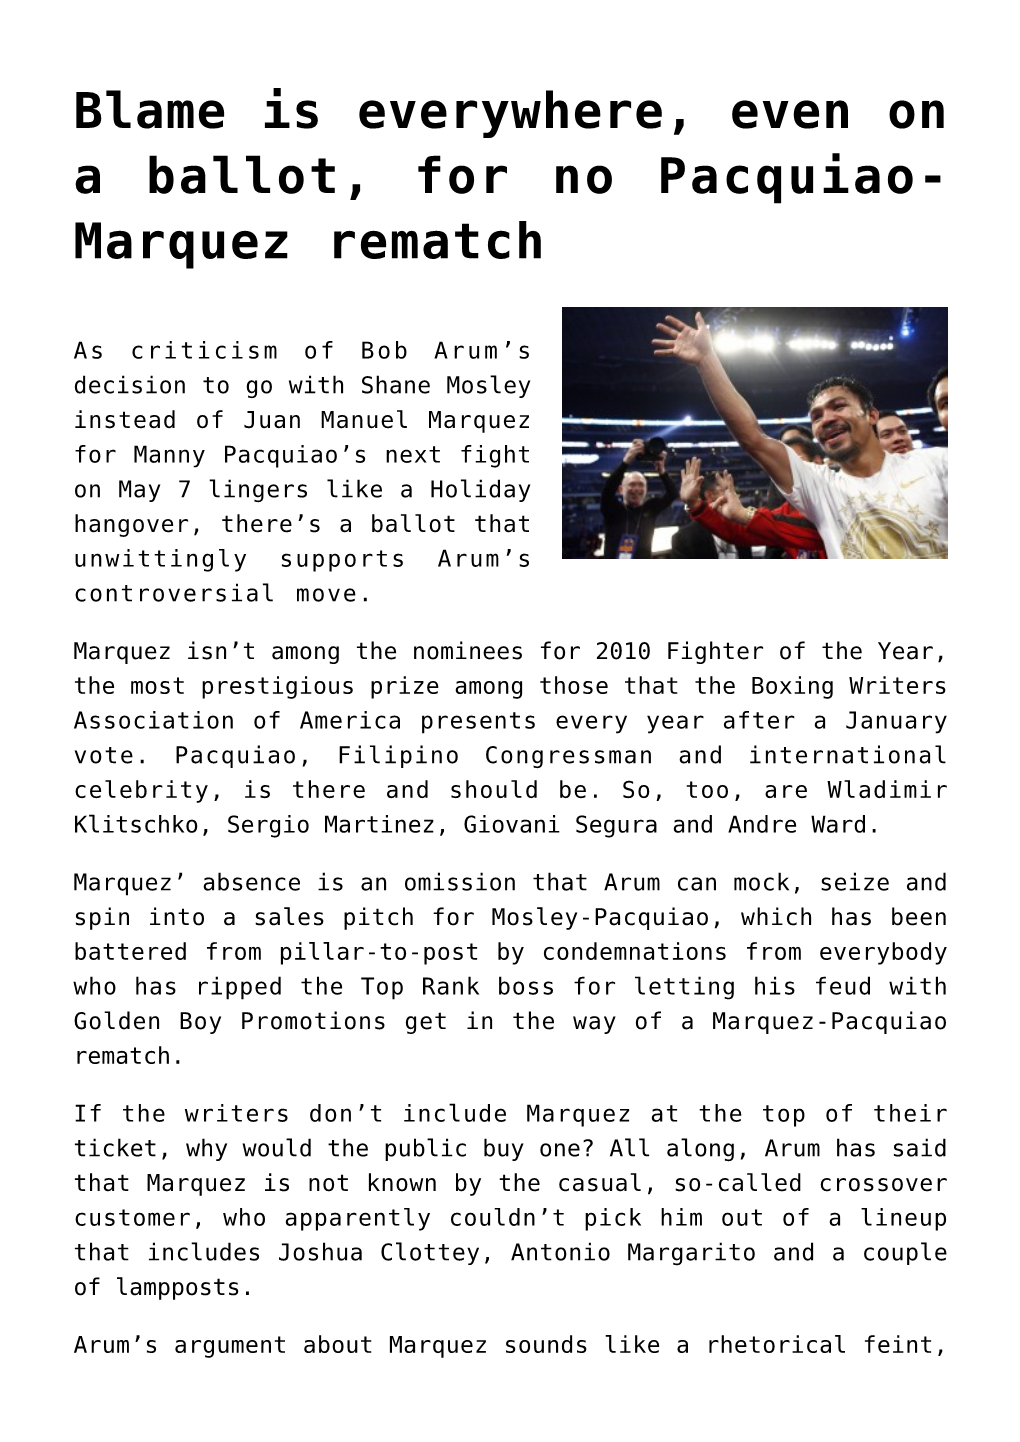 Blame Is Everywhere, Even on a Ballot, for No Pacquiao-Marquez